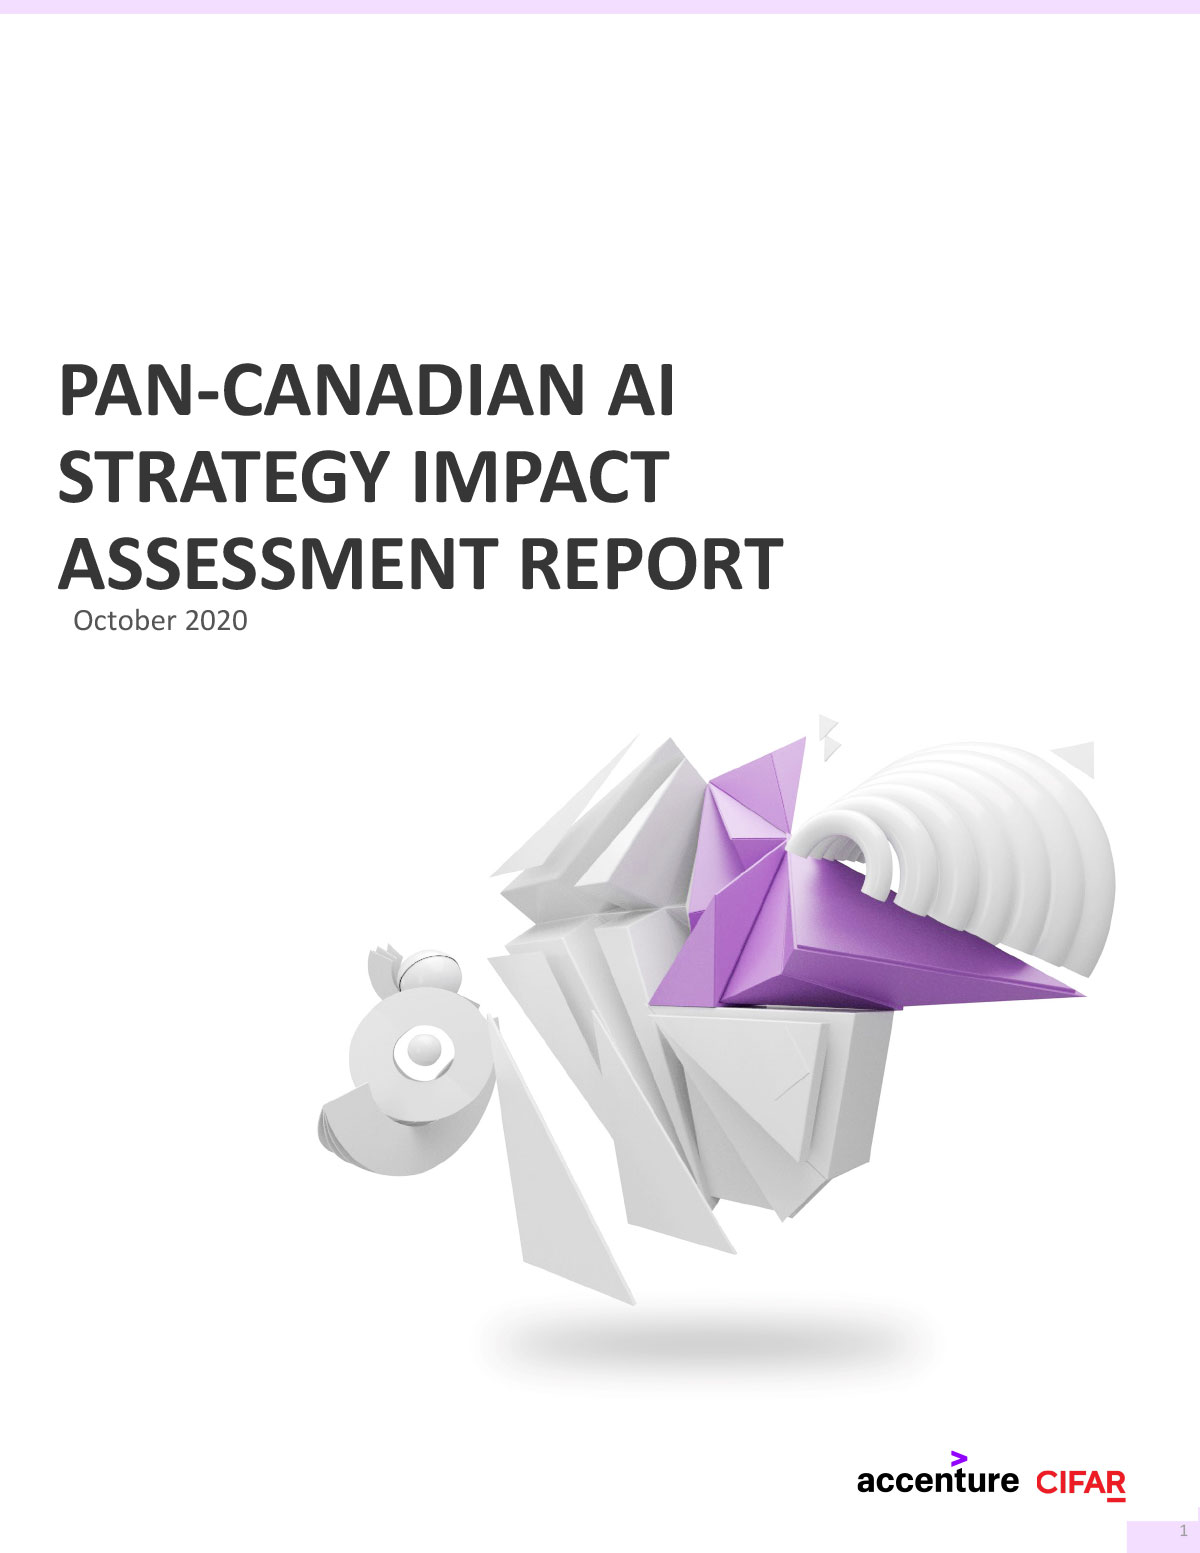 Accenture 2020 Pan-Canadian AI Strategy Impact Assessment Report